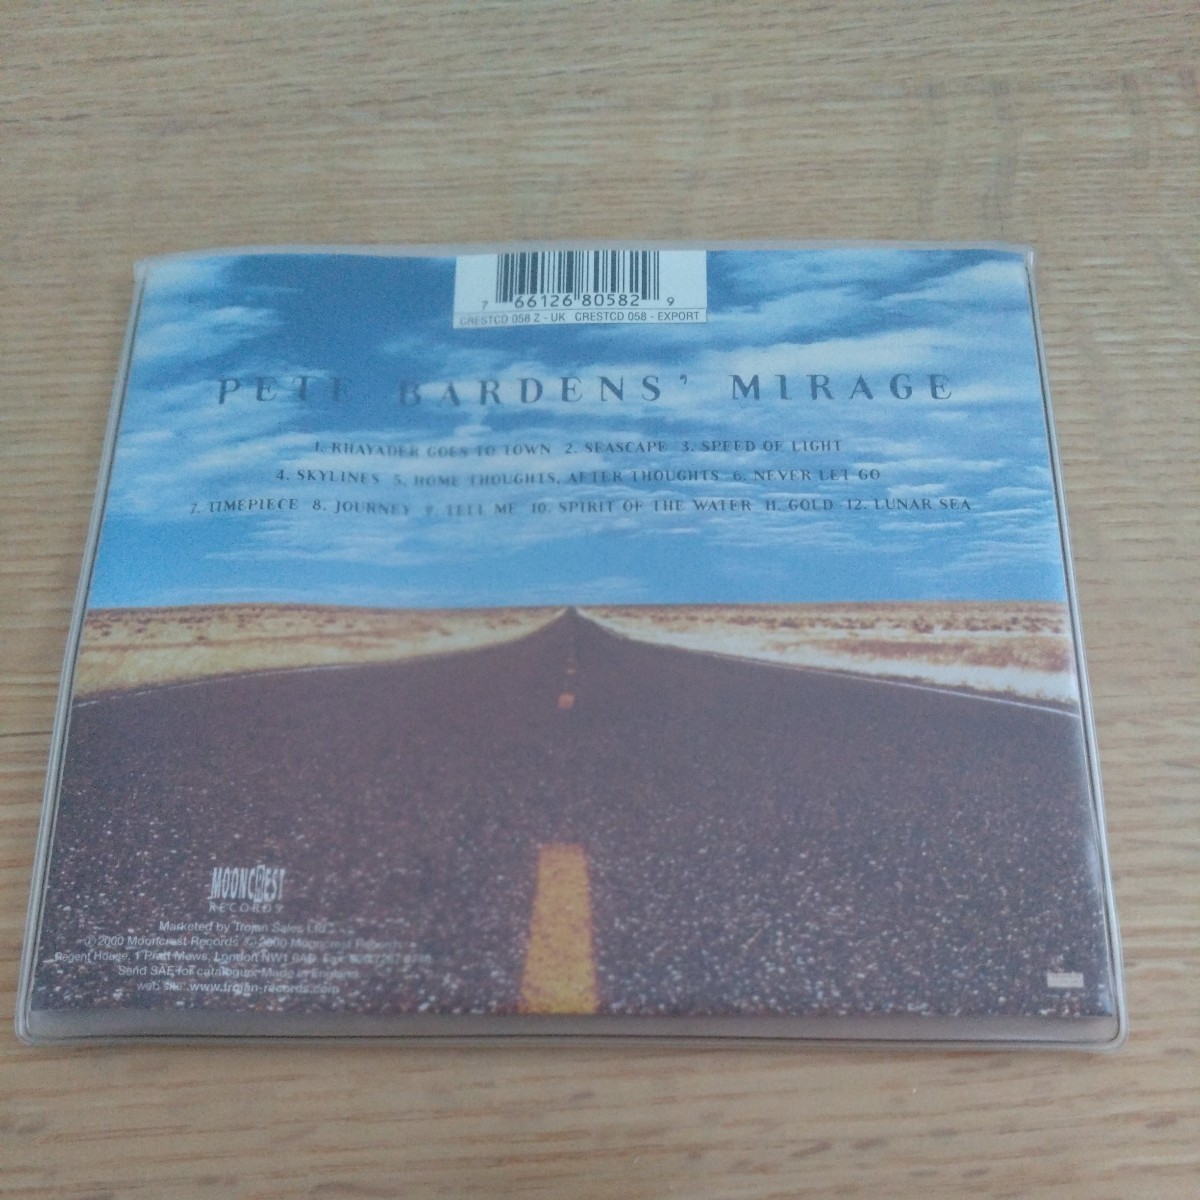 Peter Bardens' Mirage / Speed Of Light - Live (輸入盤CD)　Camel, Peter Bardens_画像4